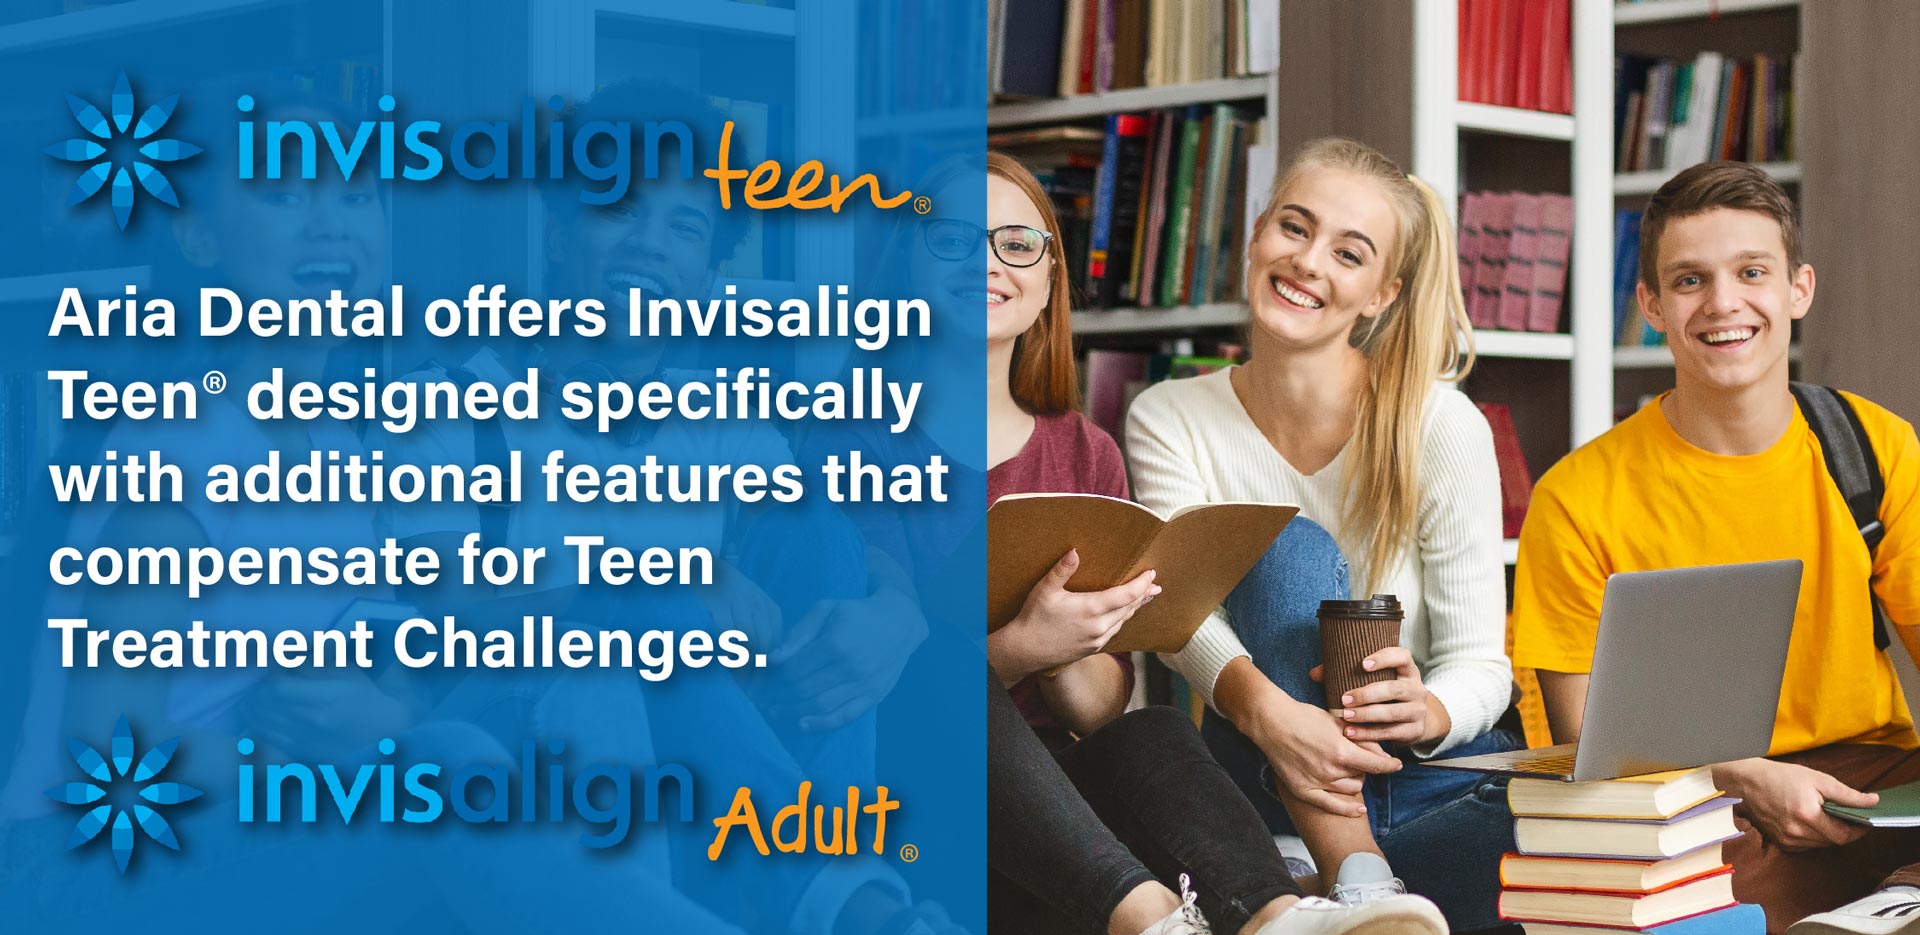 Invisalign teen offered by Aria Dental description on the left and happy face teenagers on the right